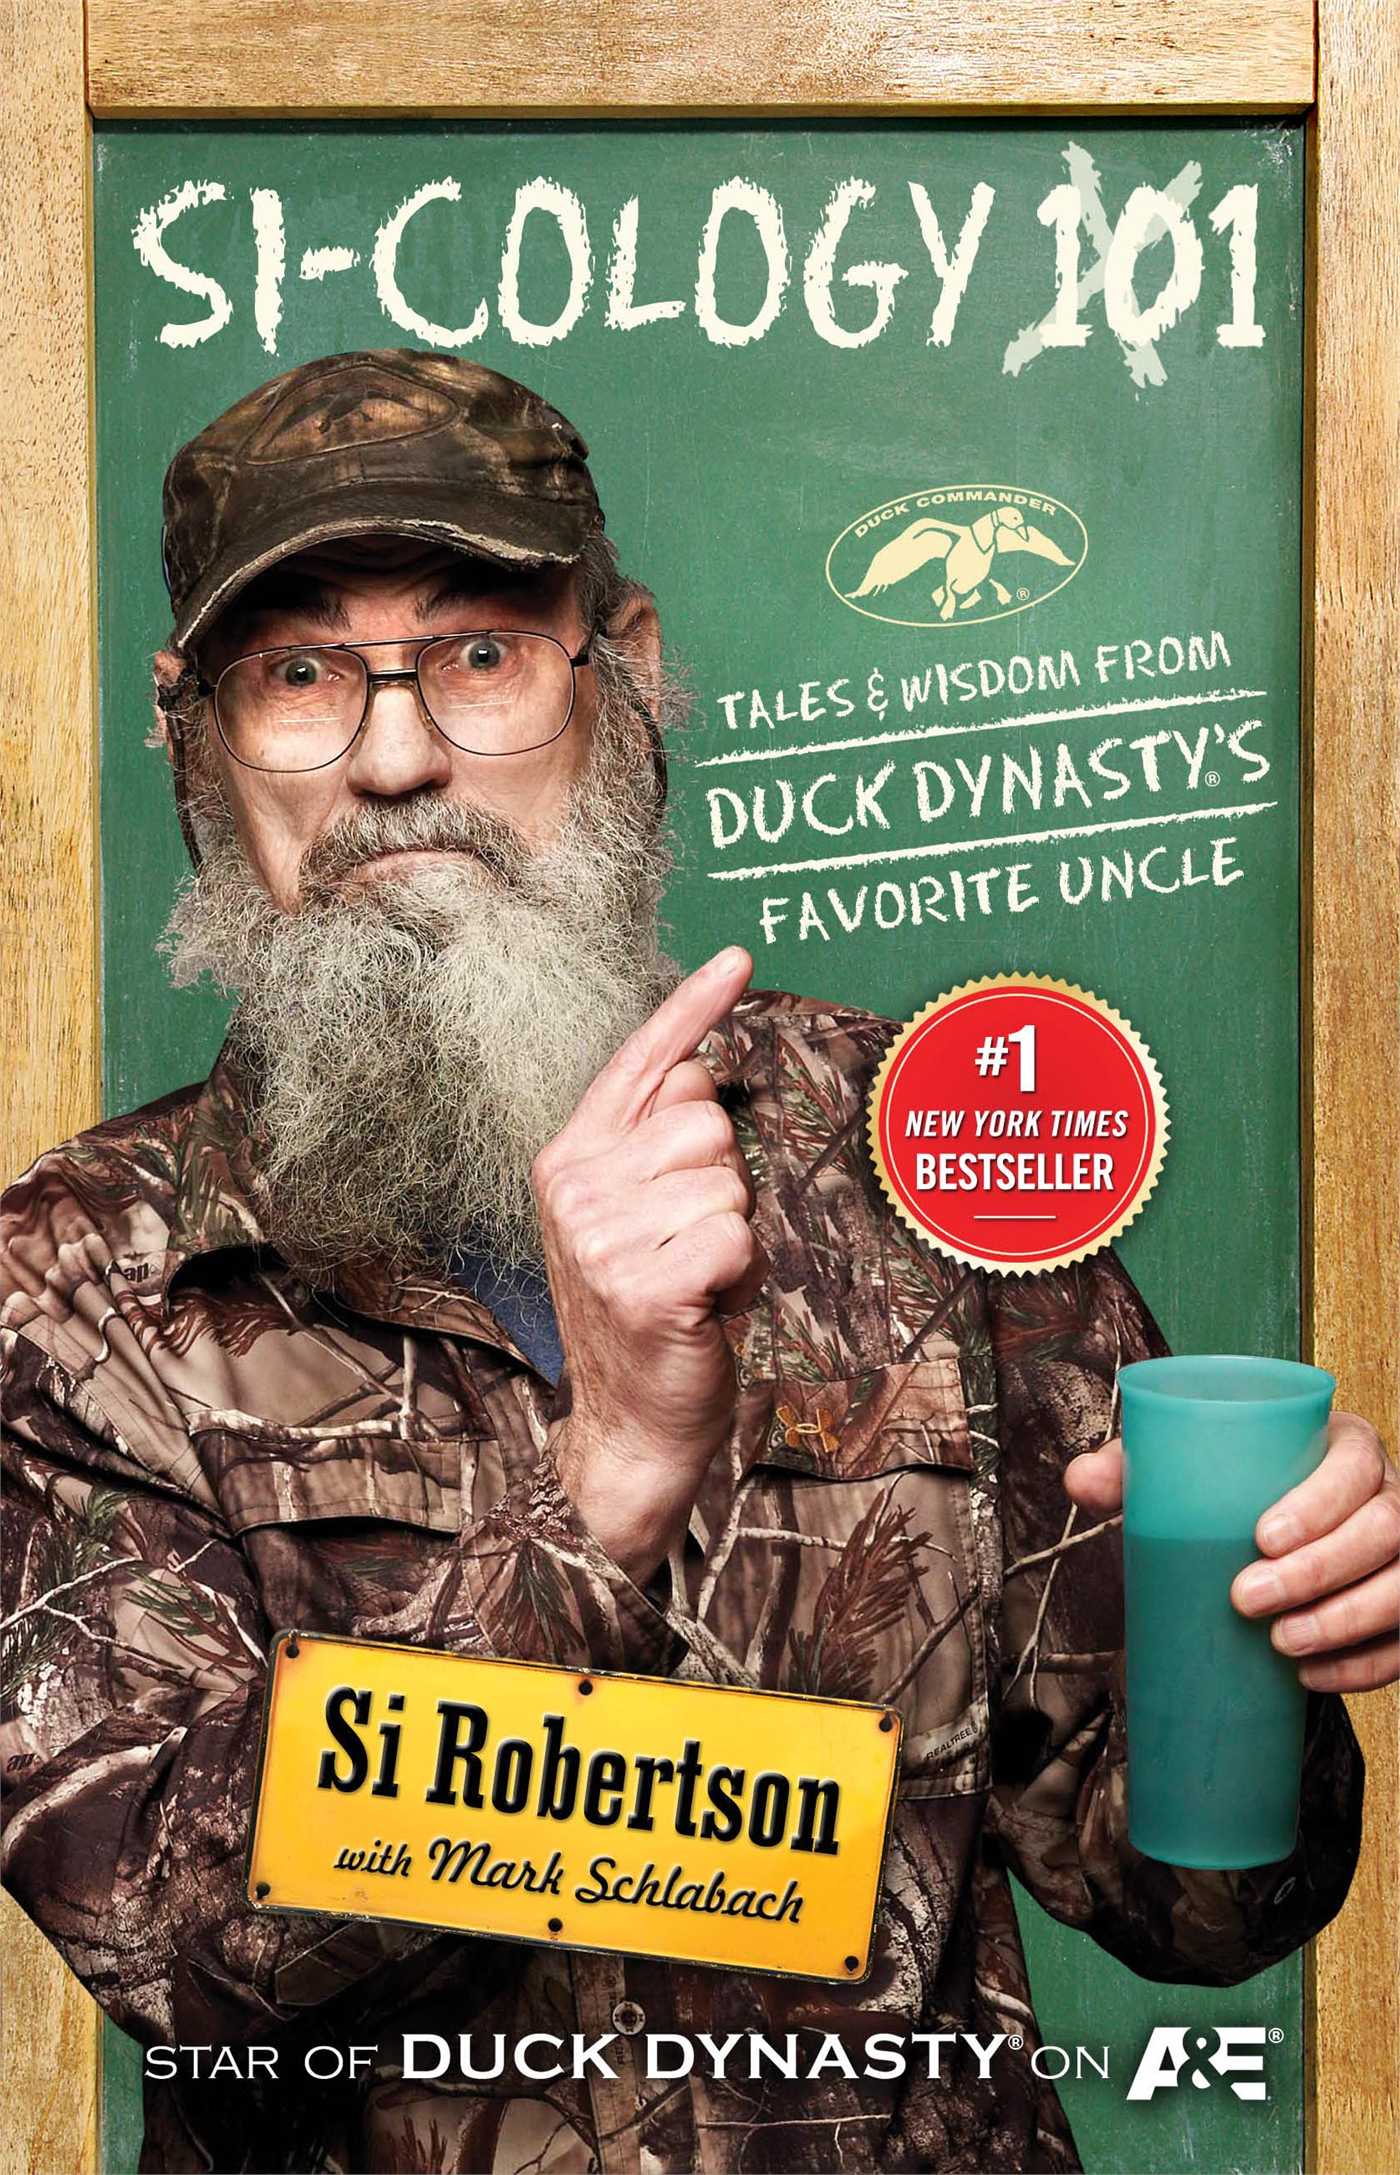 Si-cology 1 : Tales and Wisdom from Duck Dynasty's Favorite Uncle (Hardcover) - image 1 of 2